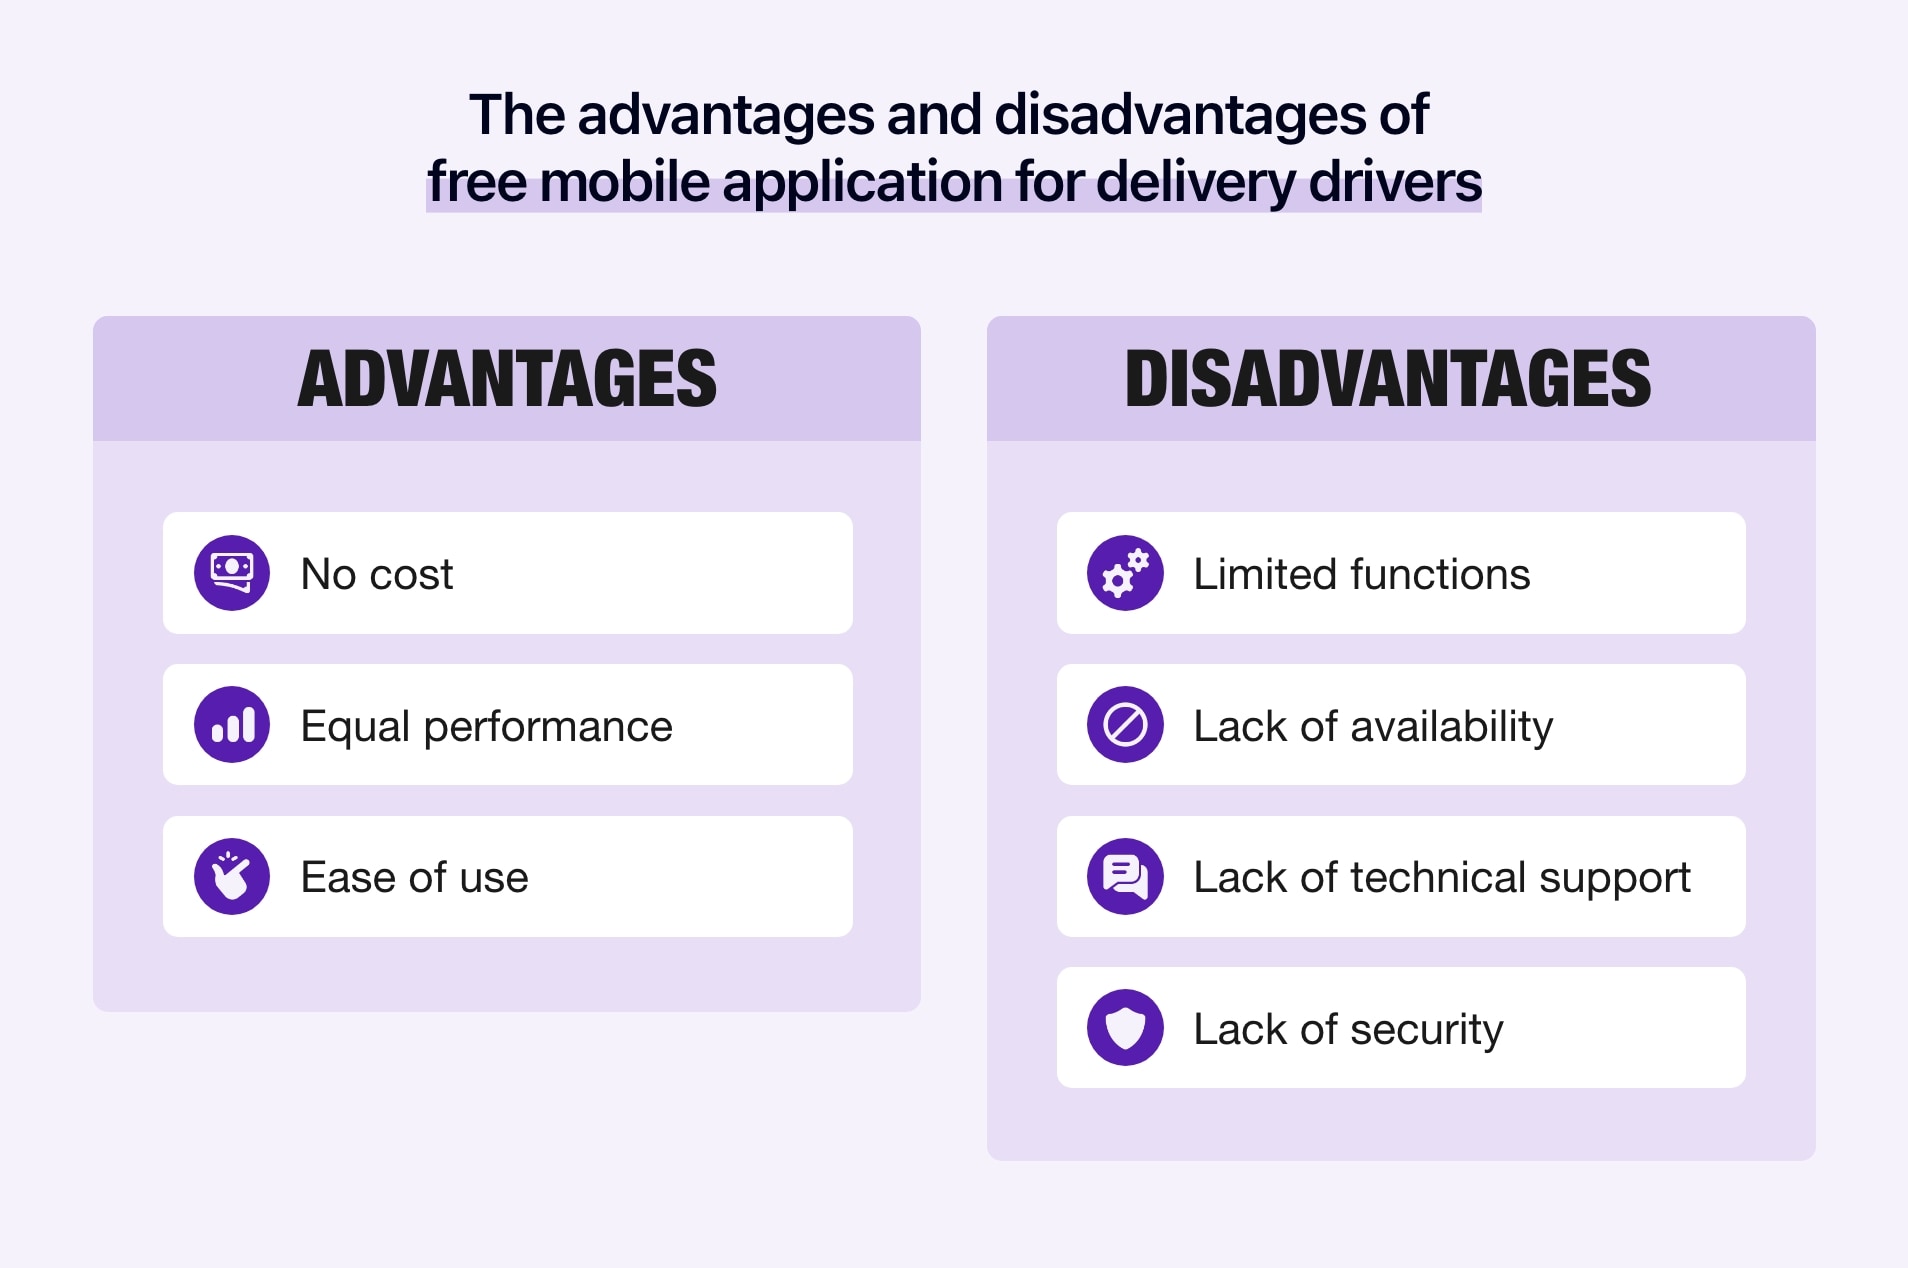 Diagram showing the advantages and disadvantages of a free mobile application for delivery drivers.